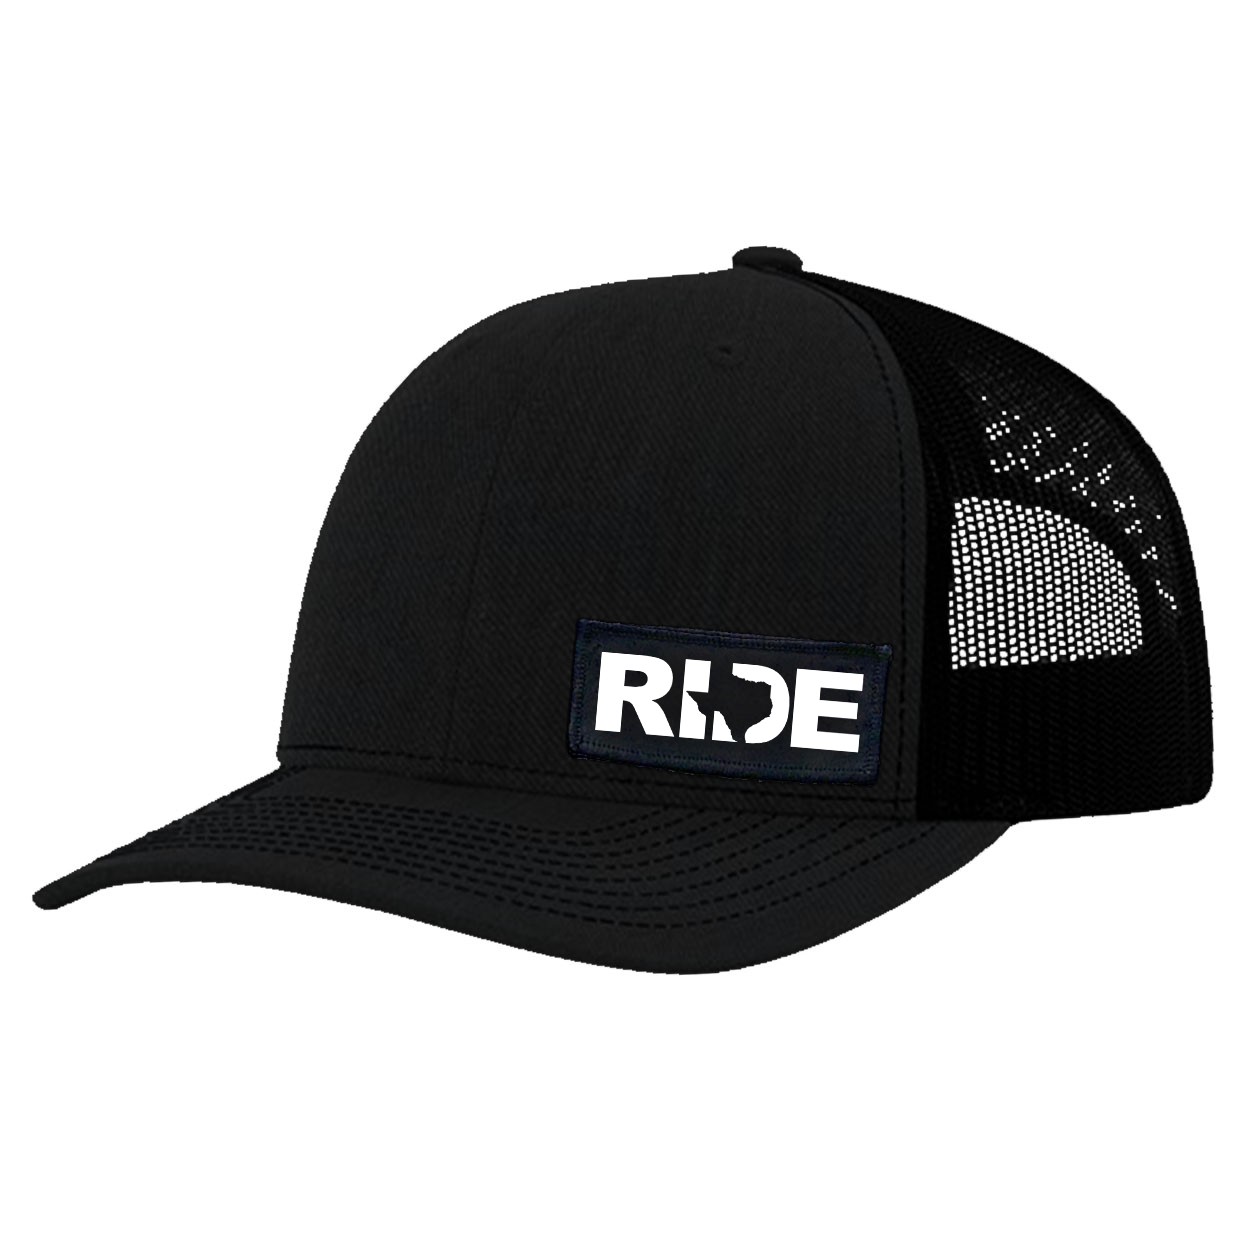 Ride Texas Night Out Youth Patch Mesh Snapback Hat Black (White Logo)